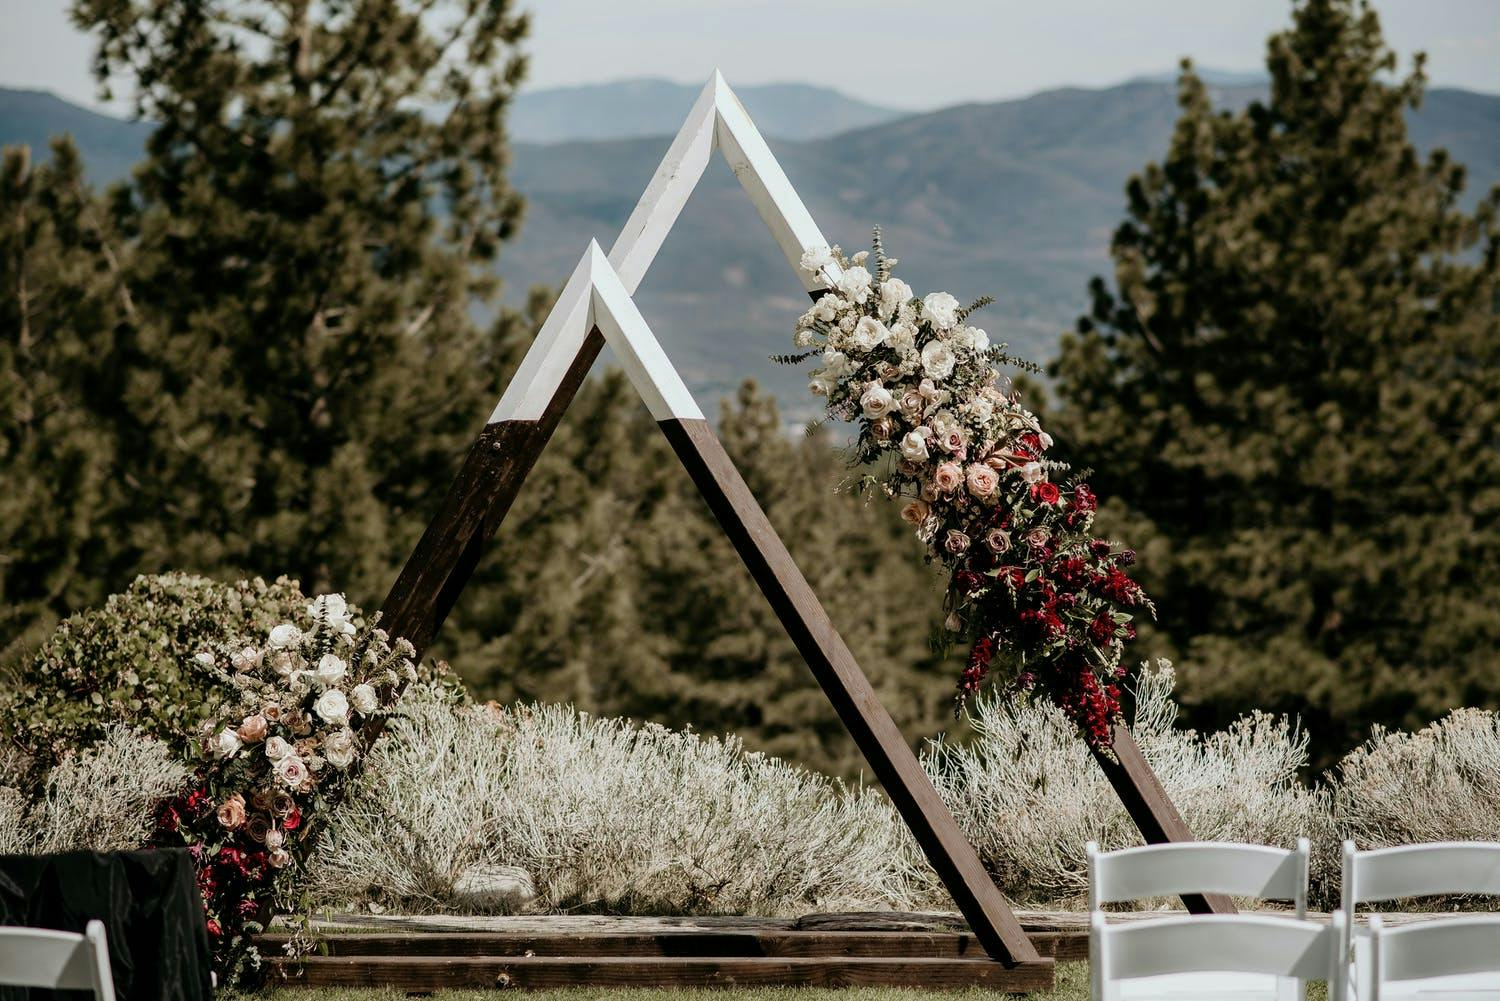 Twin triangular arches decorated with ombré blooms at wedding ceremony in mountains | PartySlate